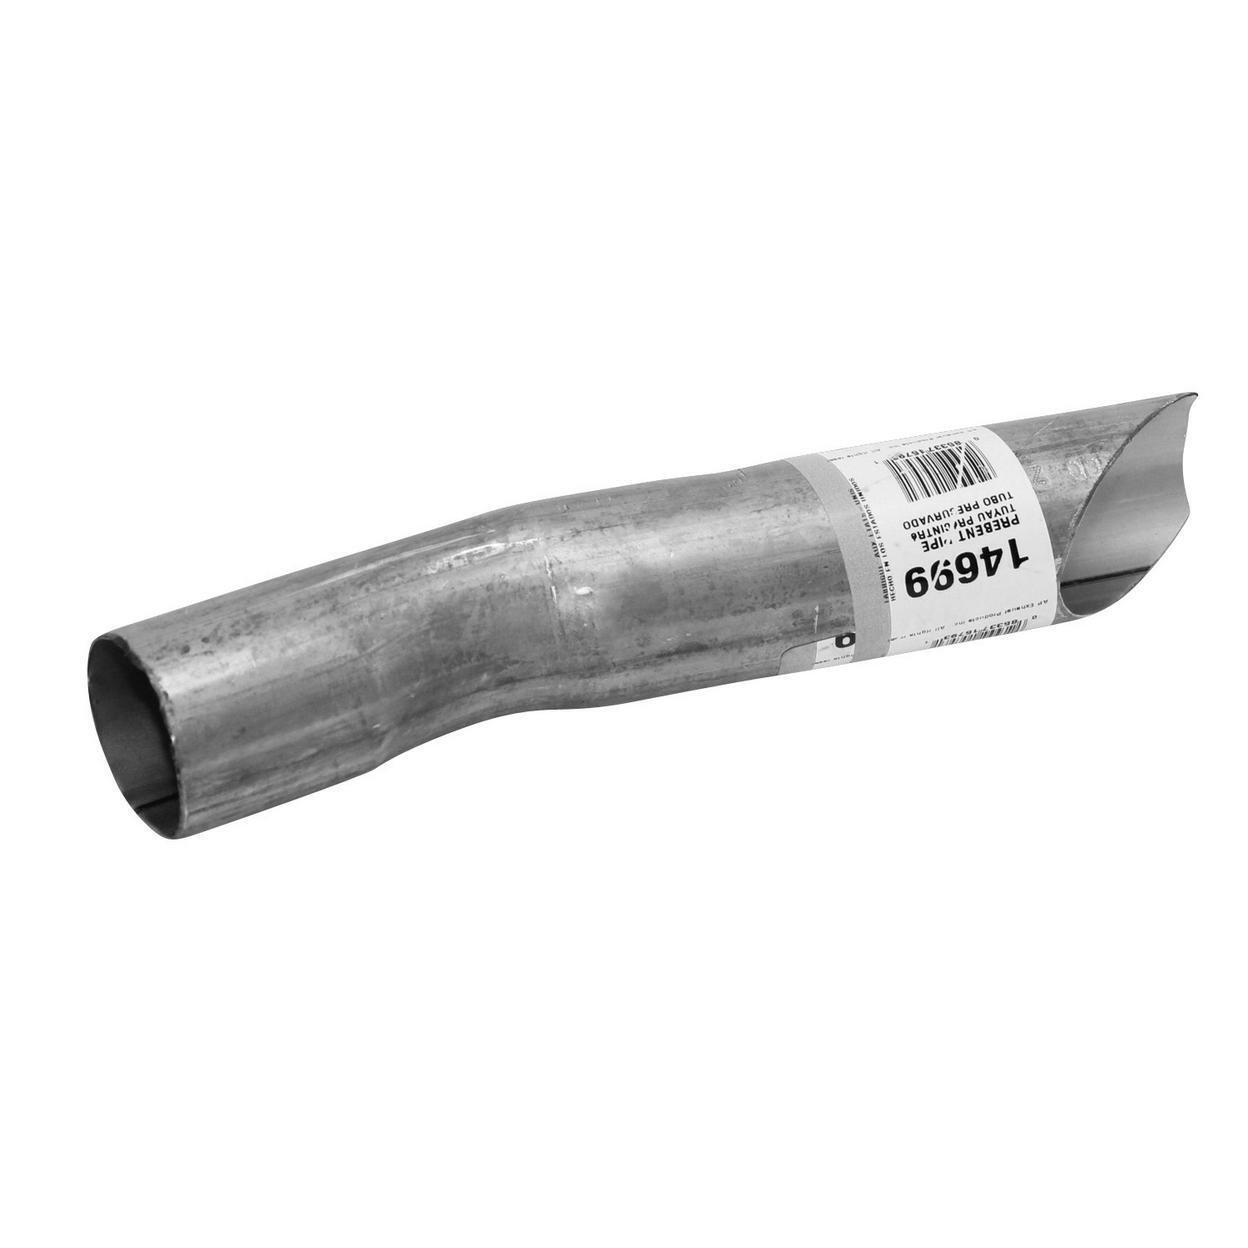 N/A Exhaust Tail Pipe Fits 1993-1996 Chevrolet Corsica 3.1L V6 GAS OHV